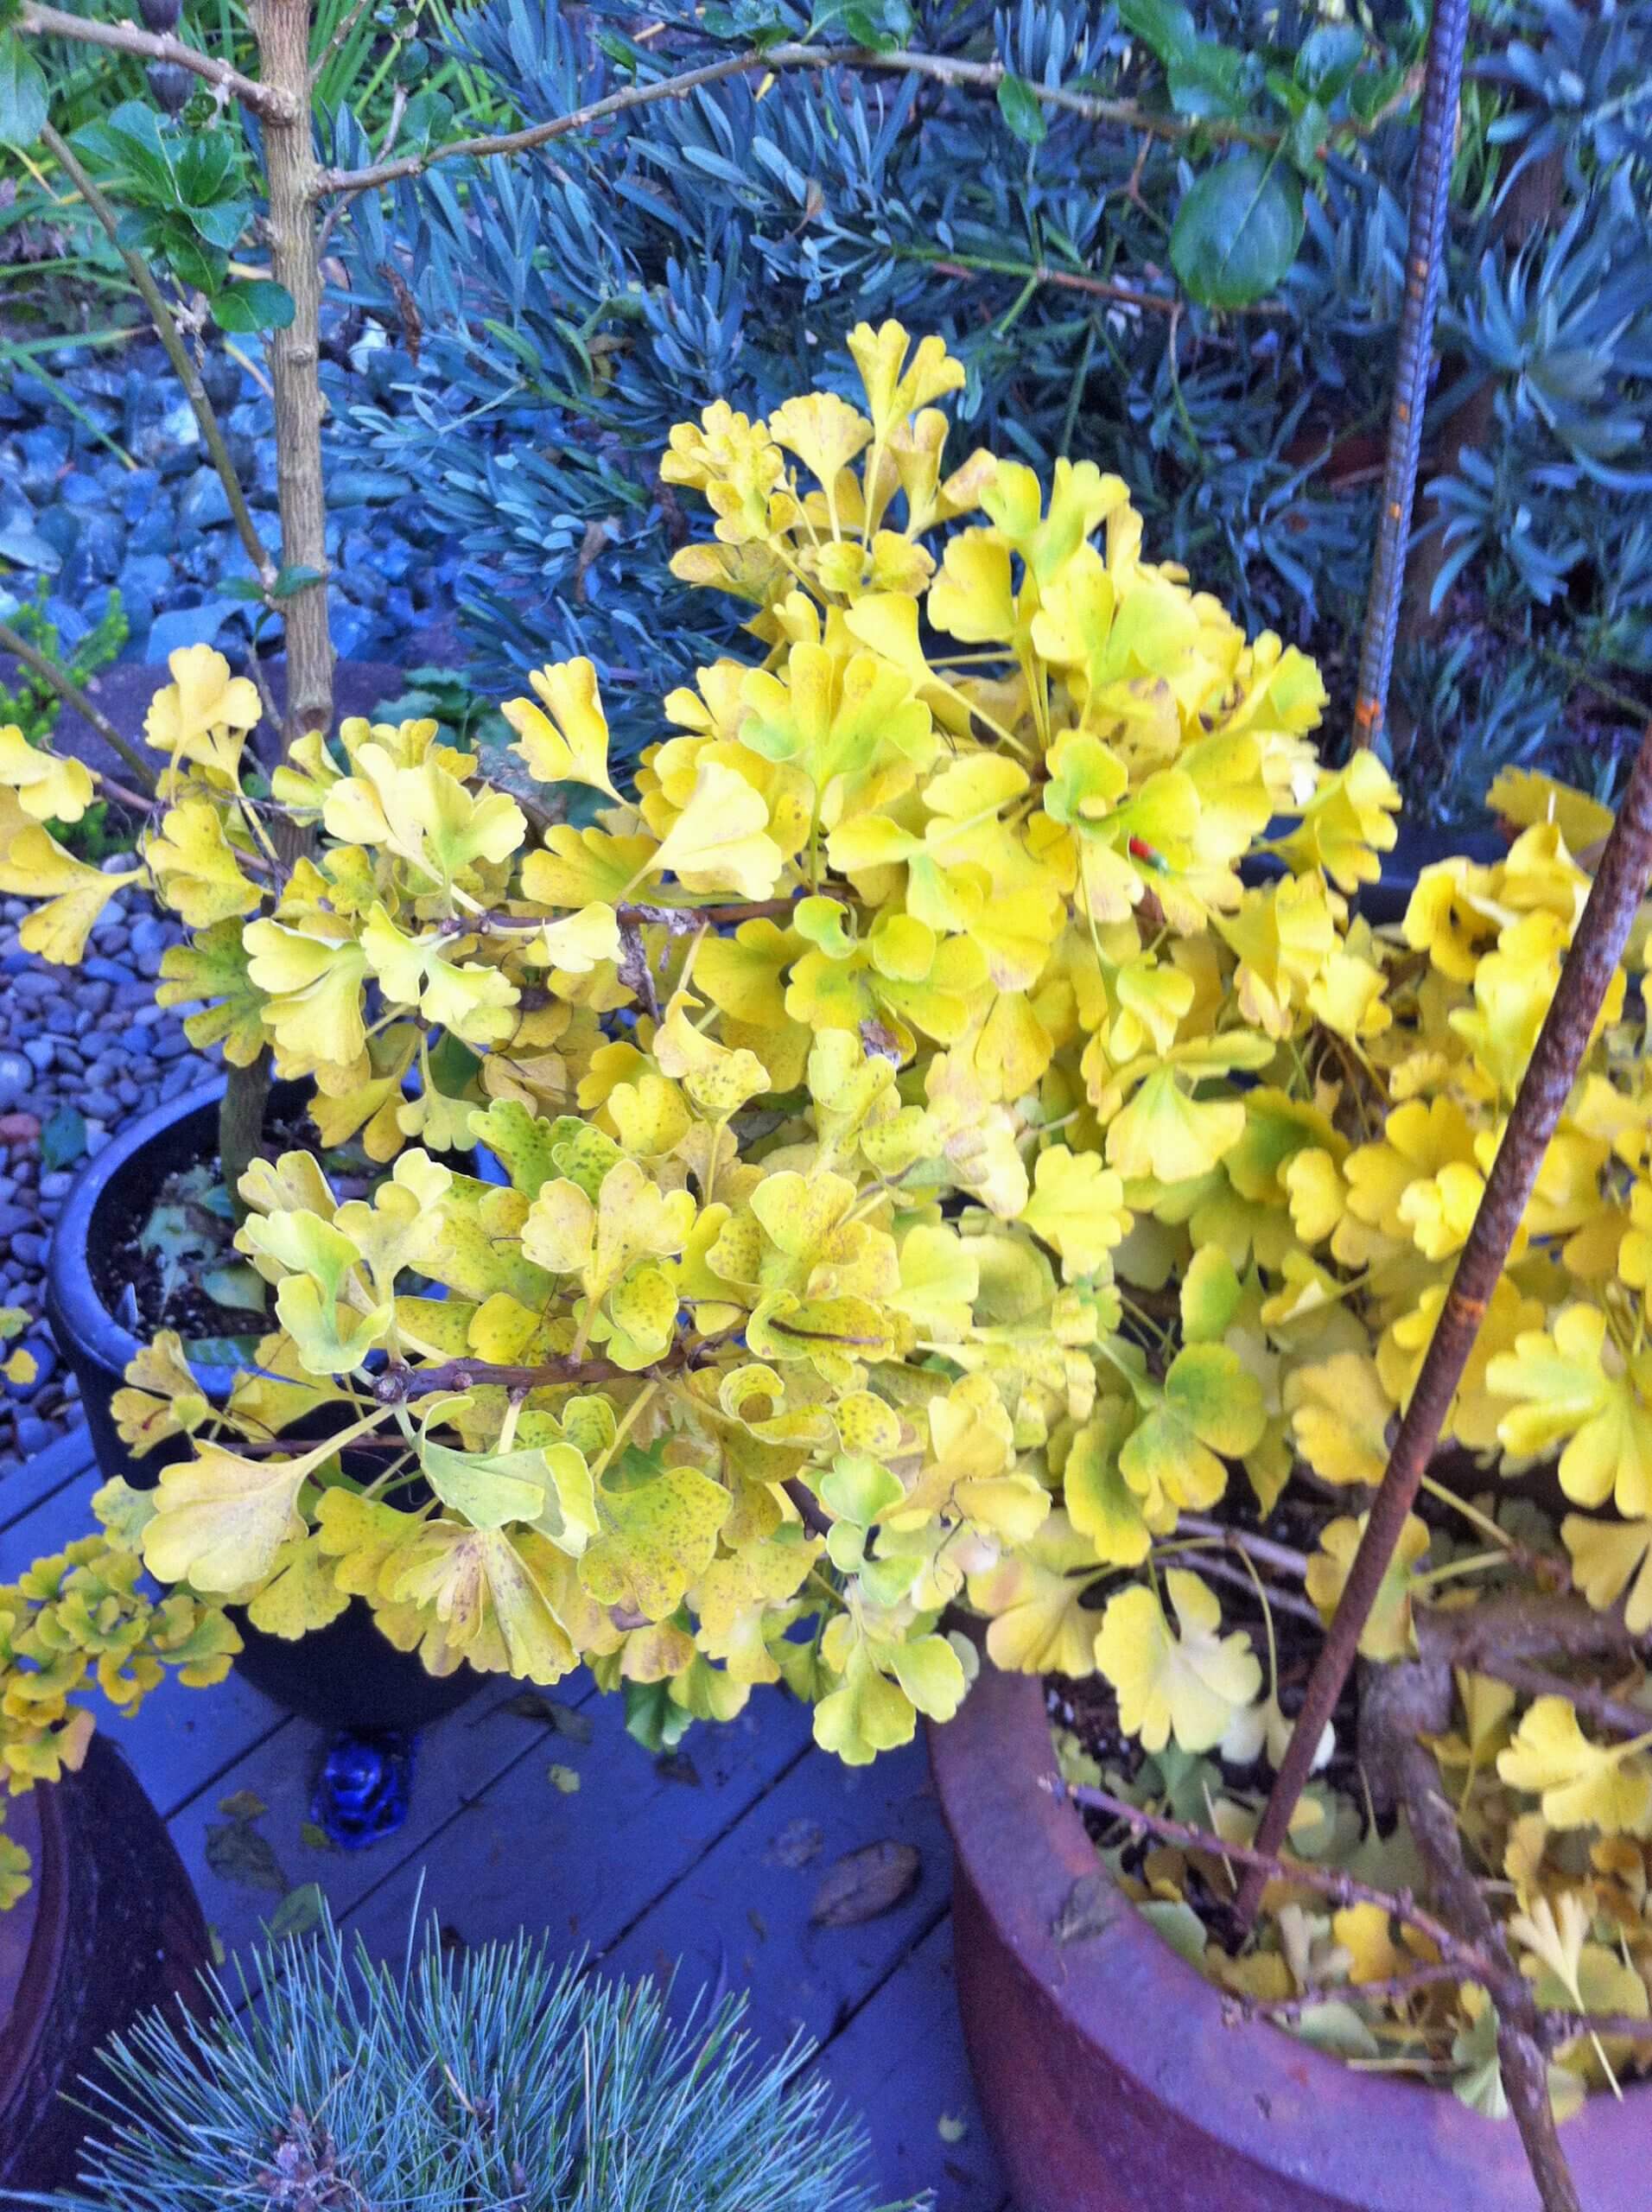 The dwarf Ginkgo biloba ‘Mariken’ turns a lovely golden color in fall. (Note the blue-gray Podocarpus in the background.)